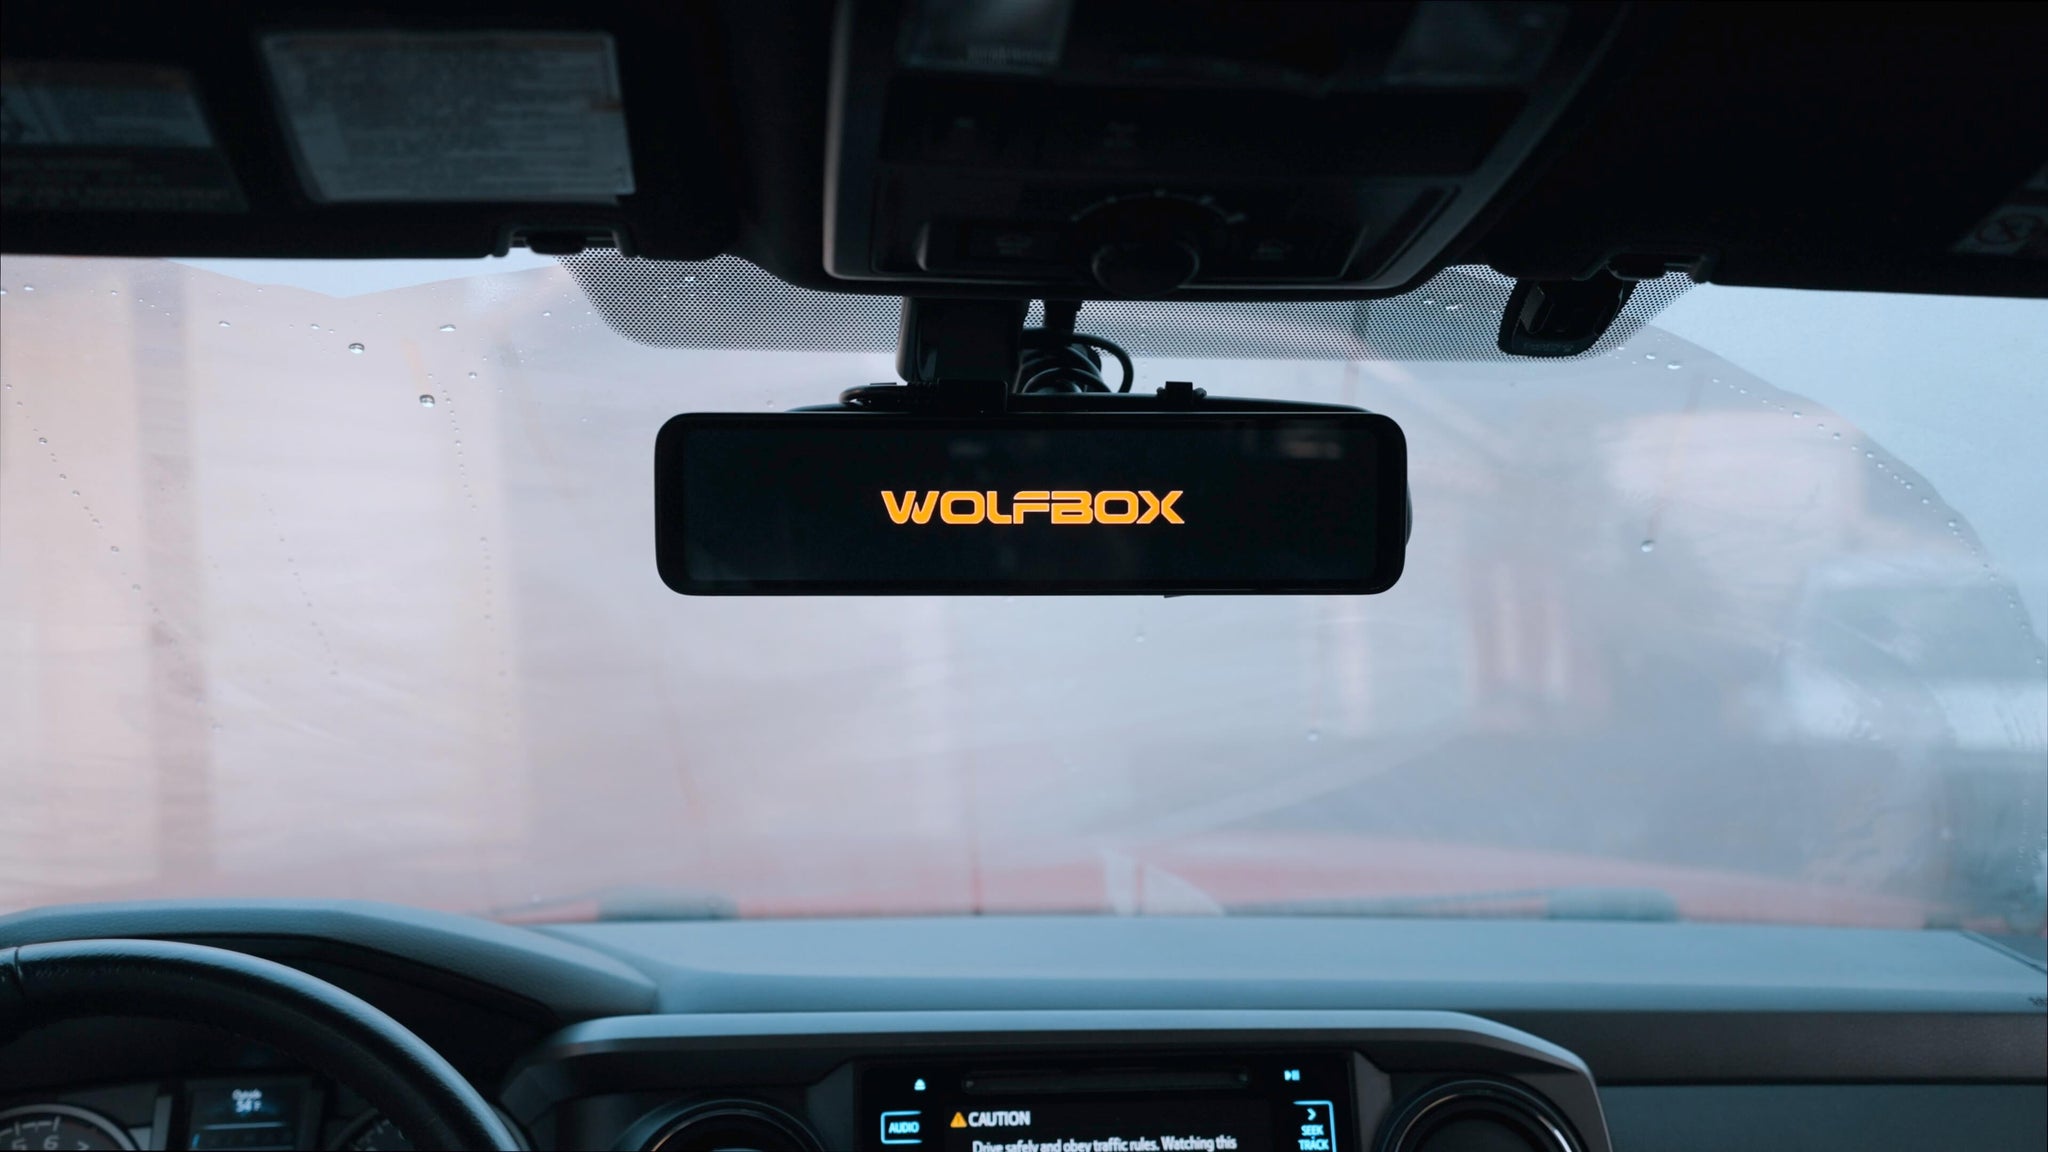 WOLFBOX G890 3 Channel Mirror Dash Cam with GPS